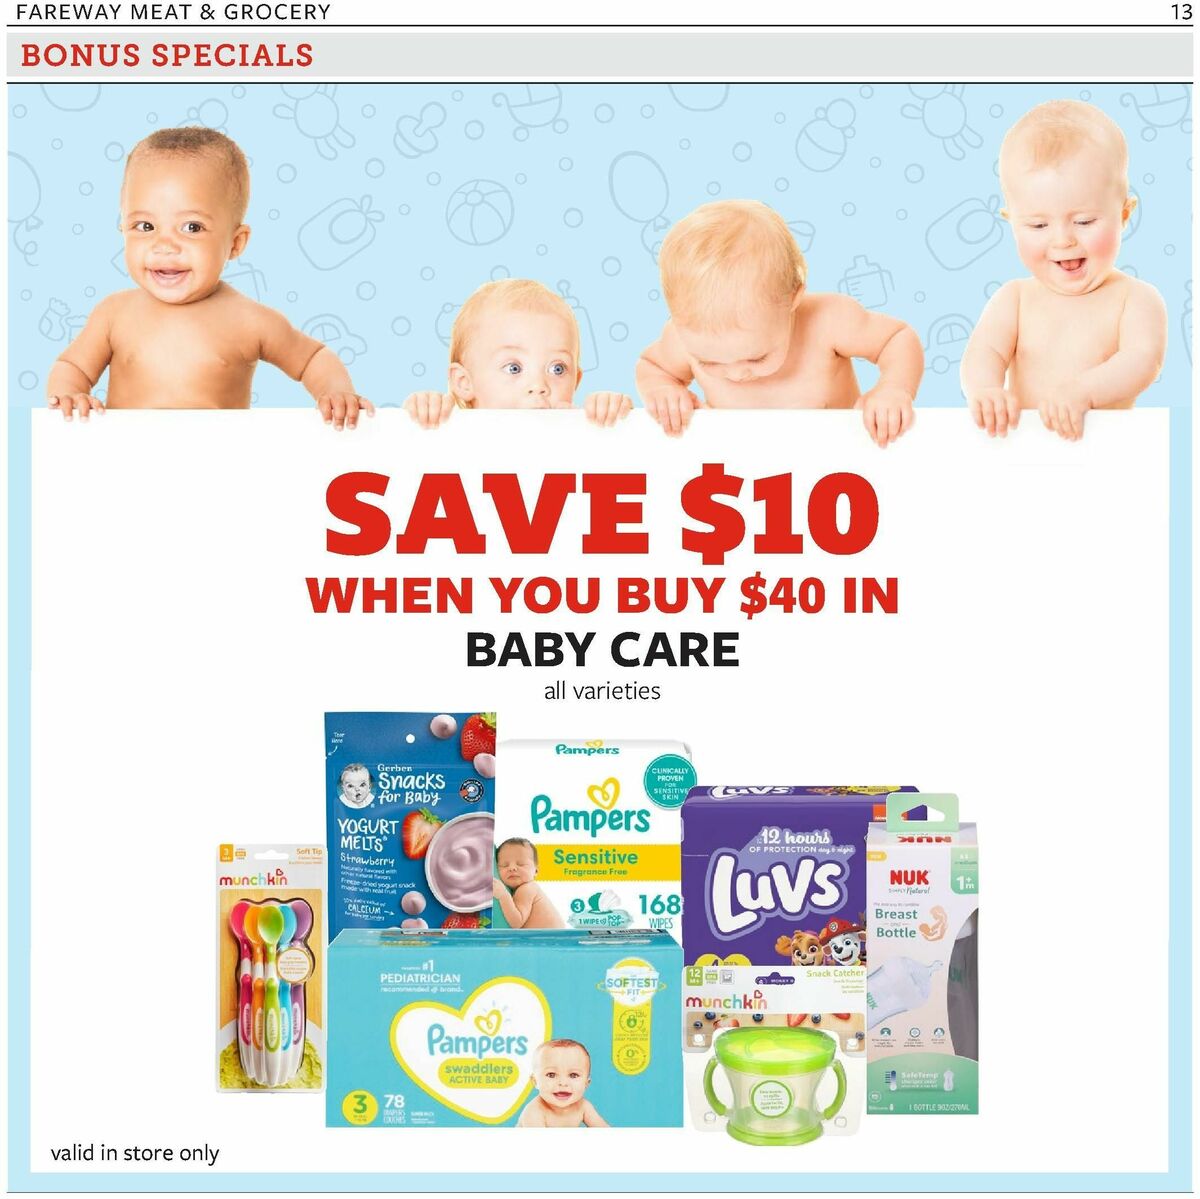 Fareway Weekly Ad from September 4